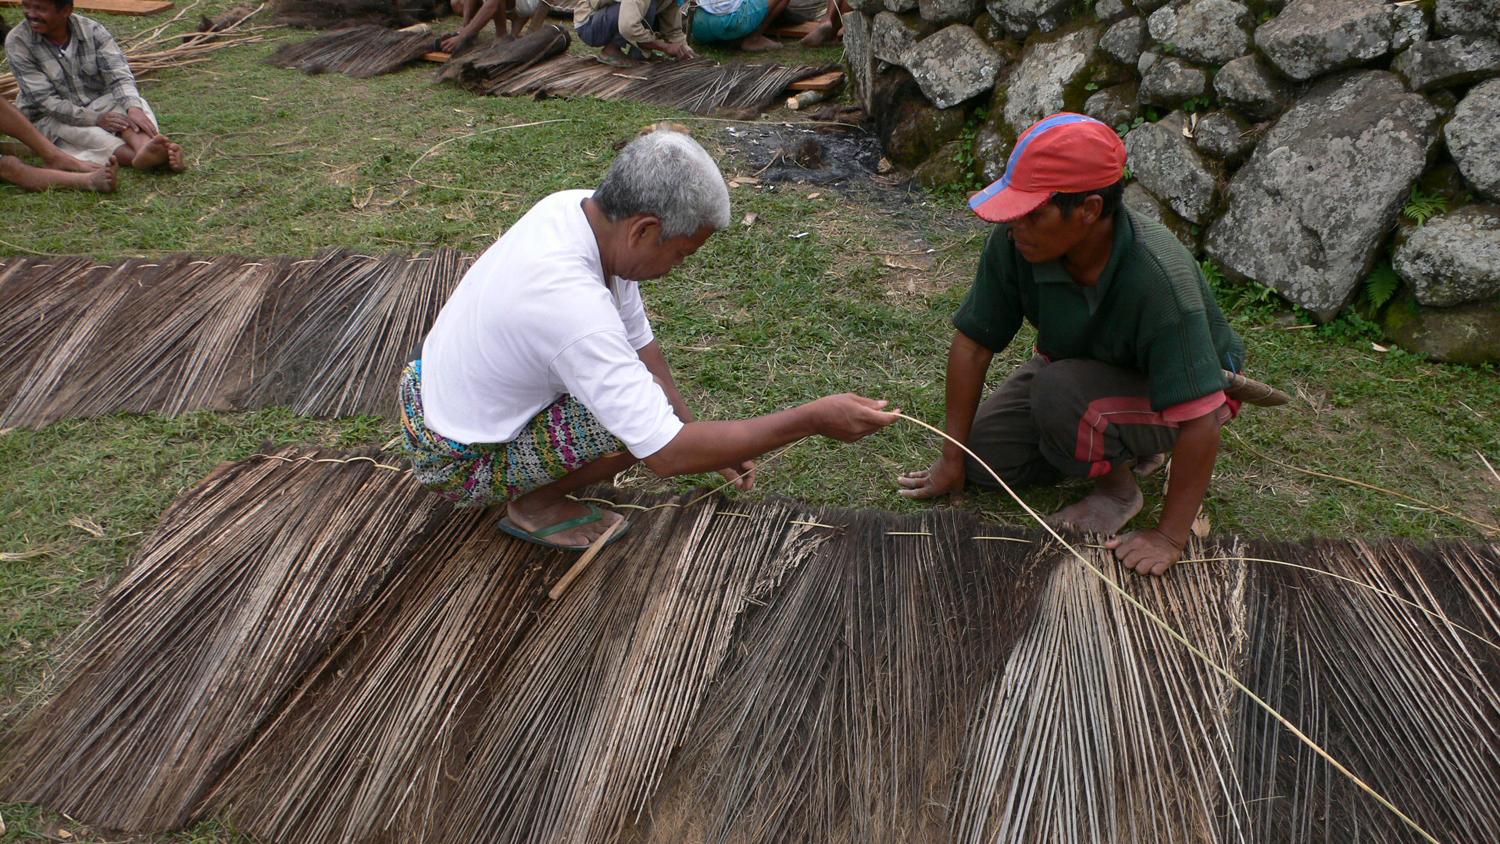 Villagers preparing the roof cover